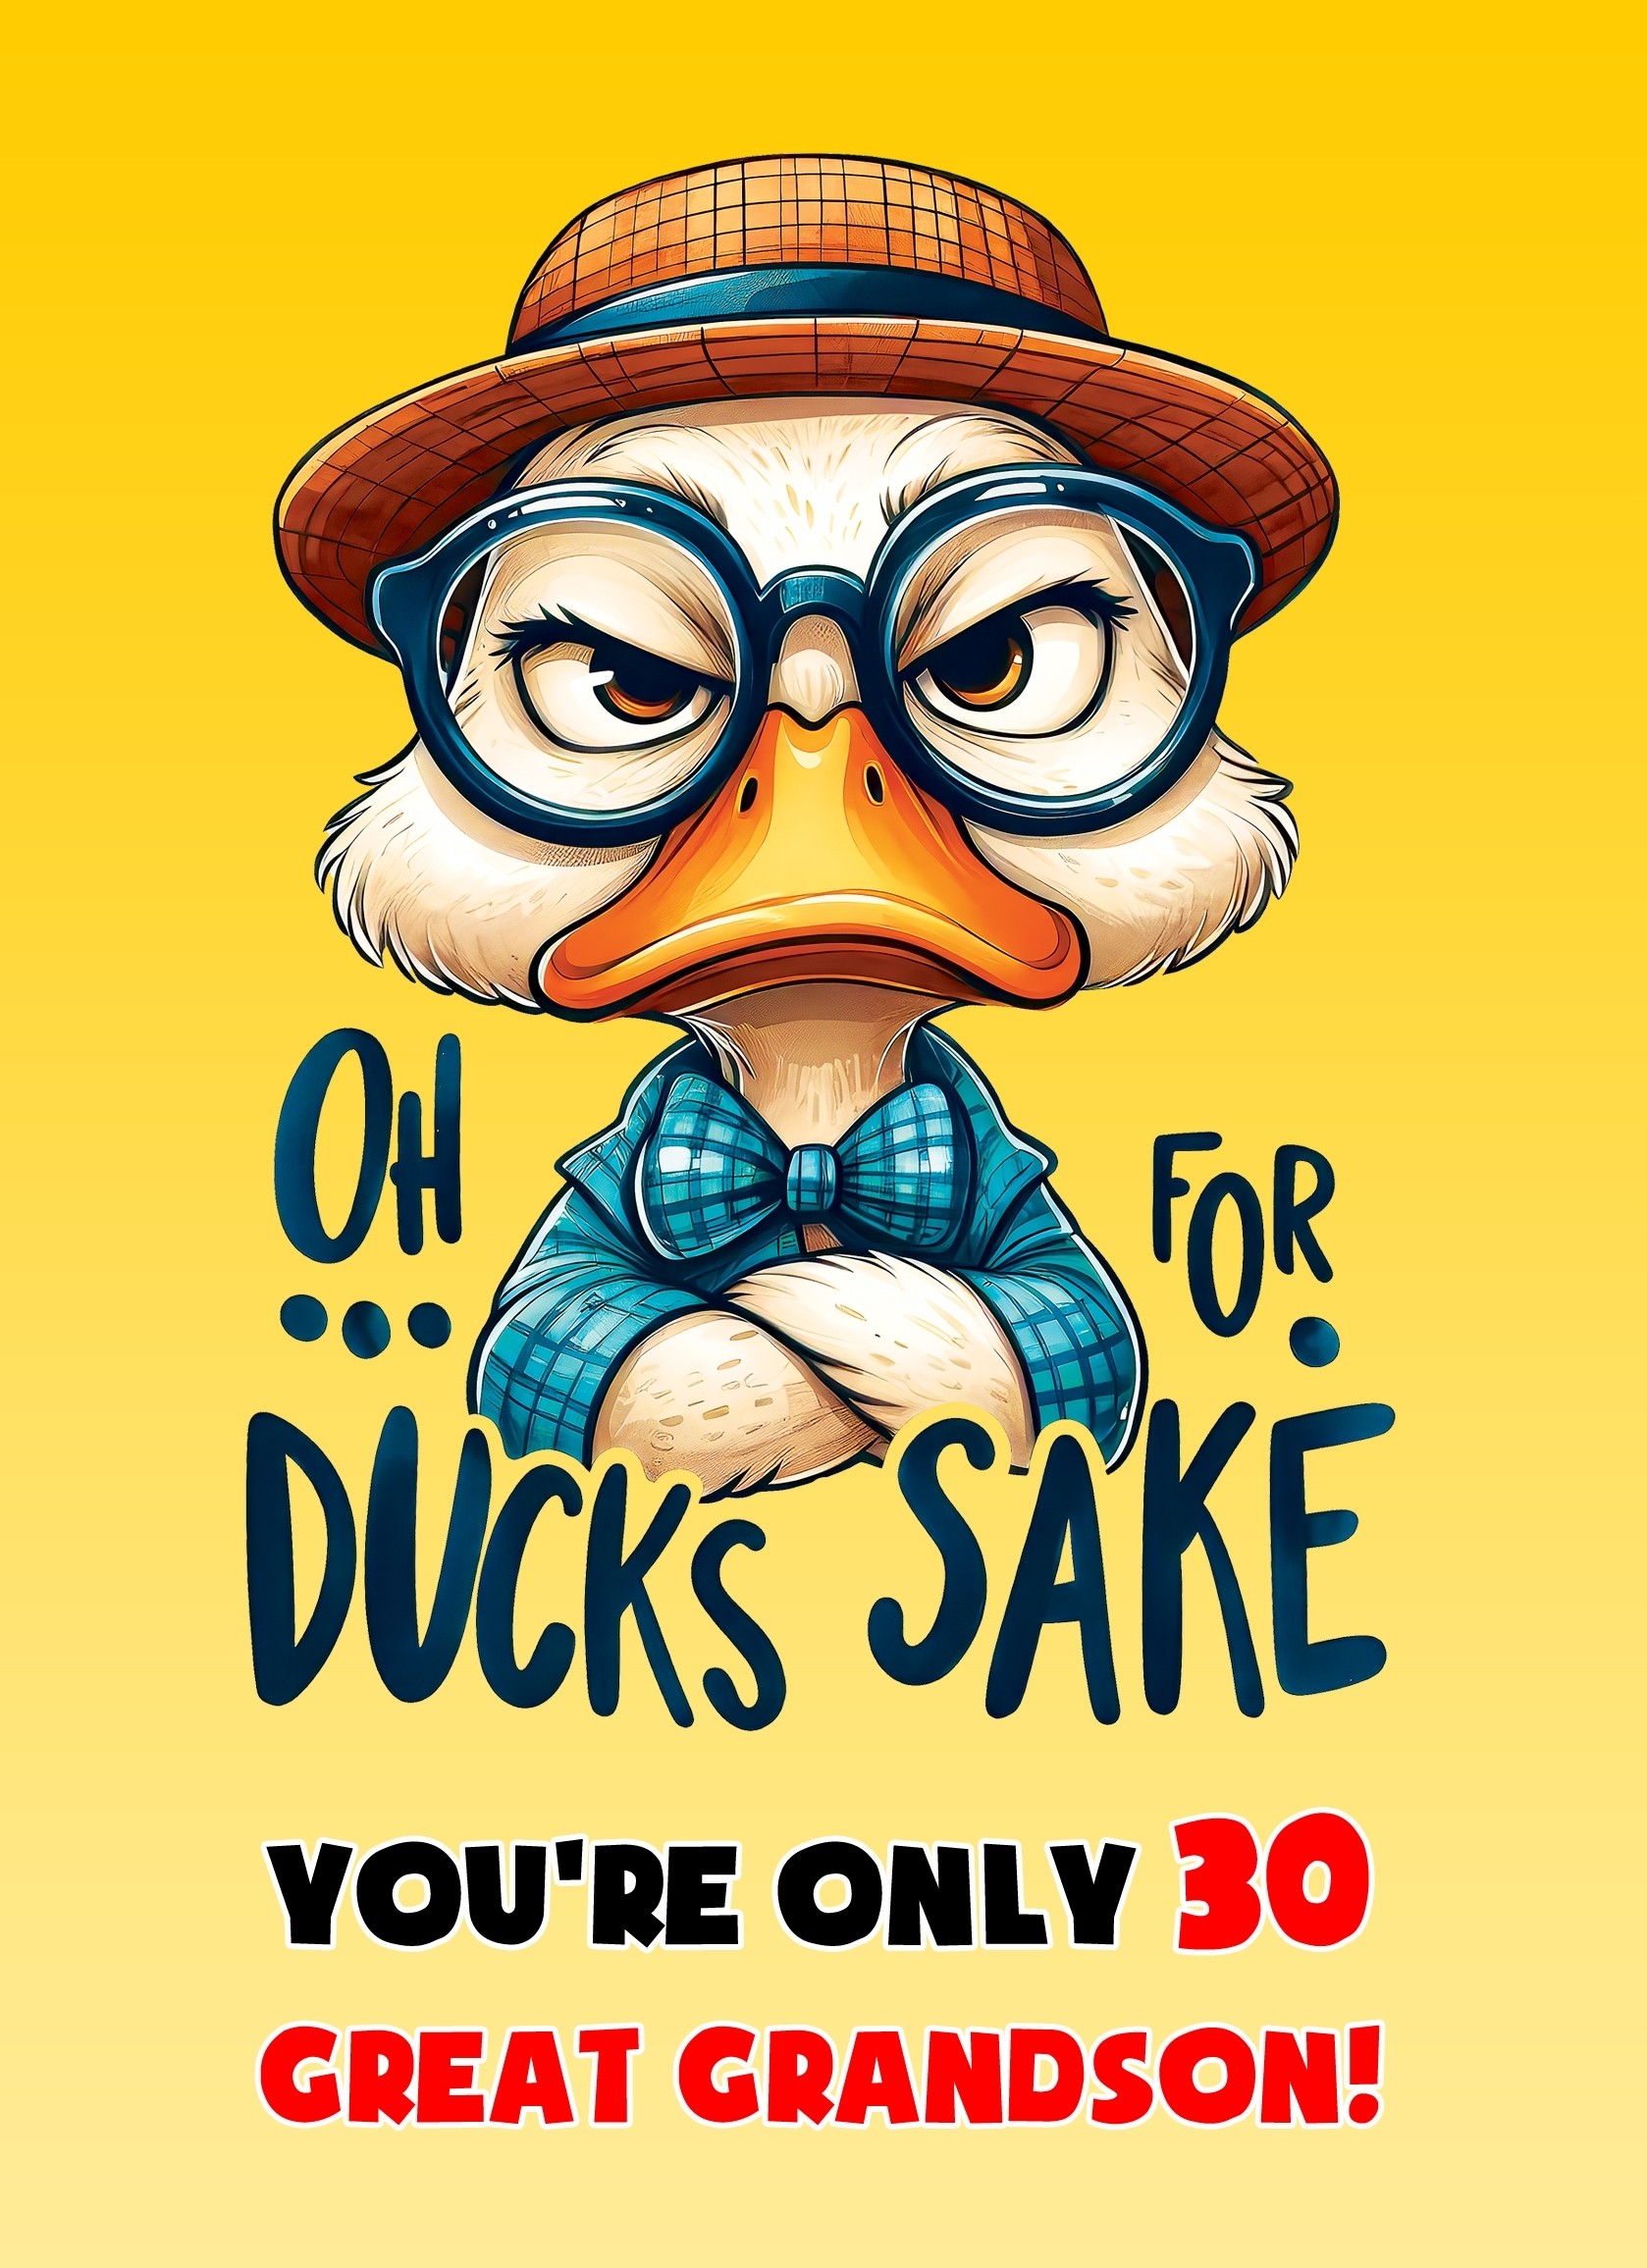 Great Grandson 30th Birthday Card (Funny Duck Humour)